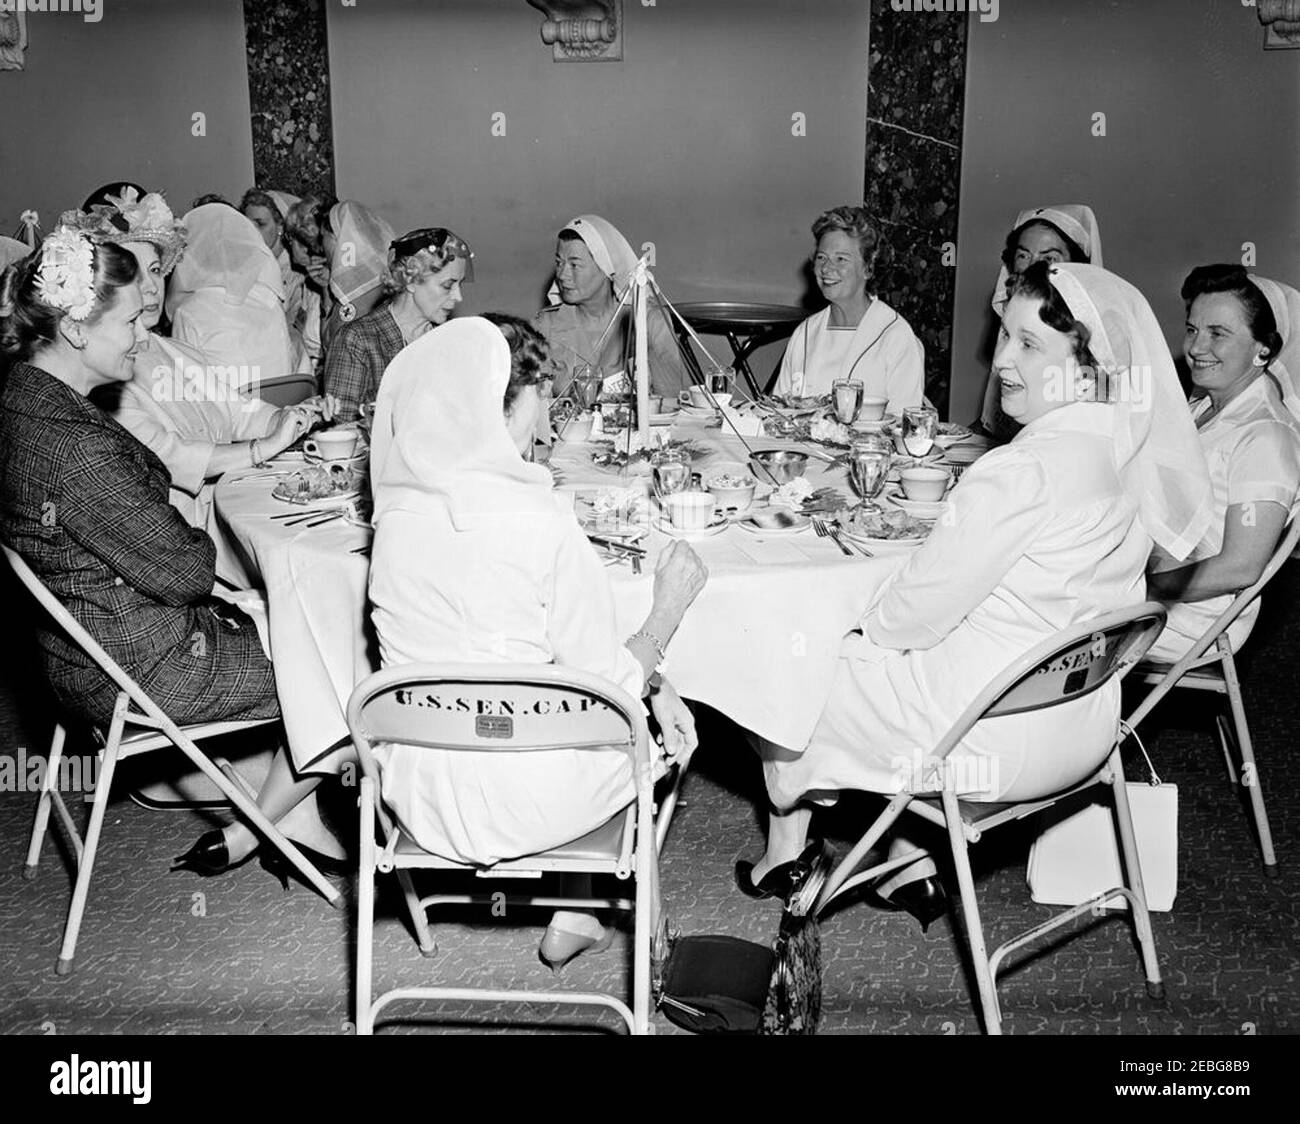 First Lady Jacqueline Kennedy (JBK) attends the Senate Ladiesu0027 Red Cross Unit Luncheon. Members of the Senate Ladies Red Cross Unit sit at a table during a luncheon (attended by First Lady Jacqueline Kennedy) in the Old Supreme Court Chamber, United States Capitol Building, Washington, D.C. The Red Cross unit (also known as u201cLadies of the Senateu201d) is comprised of the wives of members of the US Senate. Clockwise around table (from far left): Baroness Rosemary Silvercruys, former of wife Senator Brien McMahon (Connecticut); Estelle Cadorette McGrath, wife of former Senator J. Howa Stock Photo